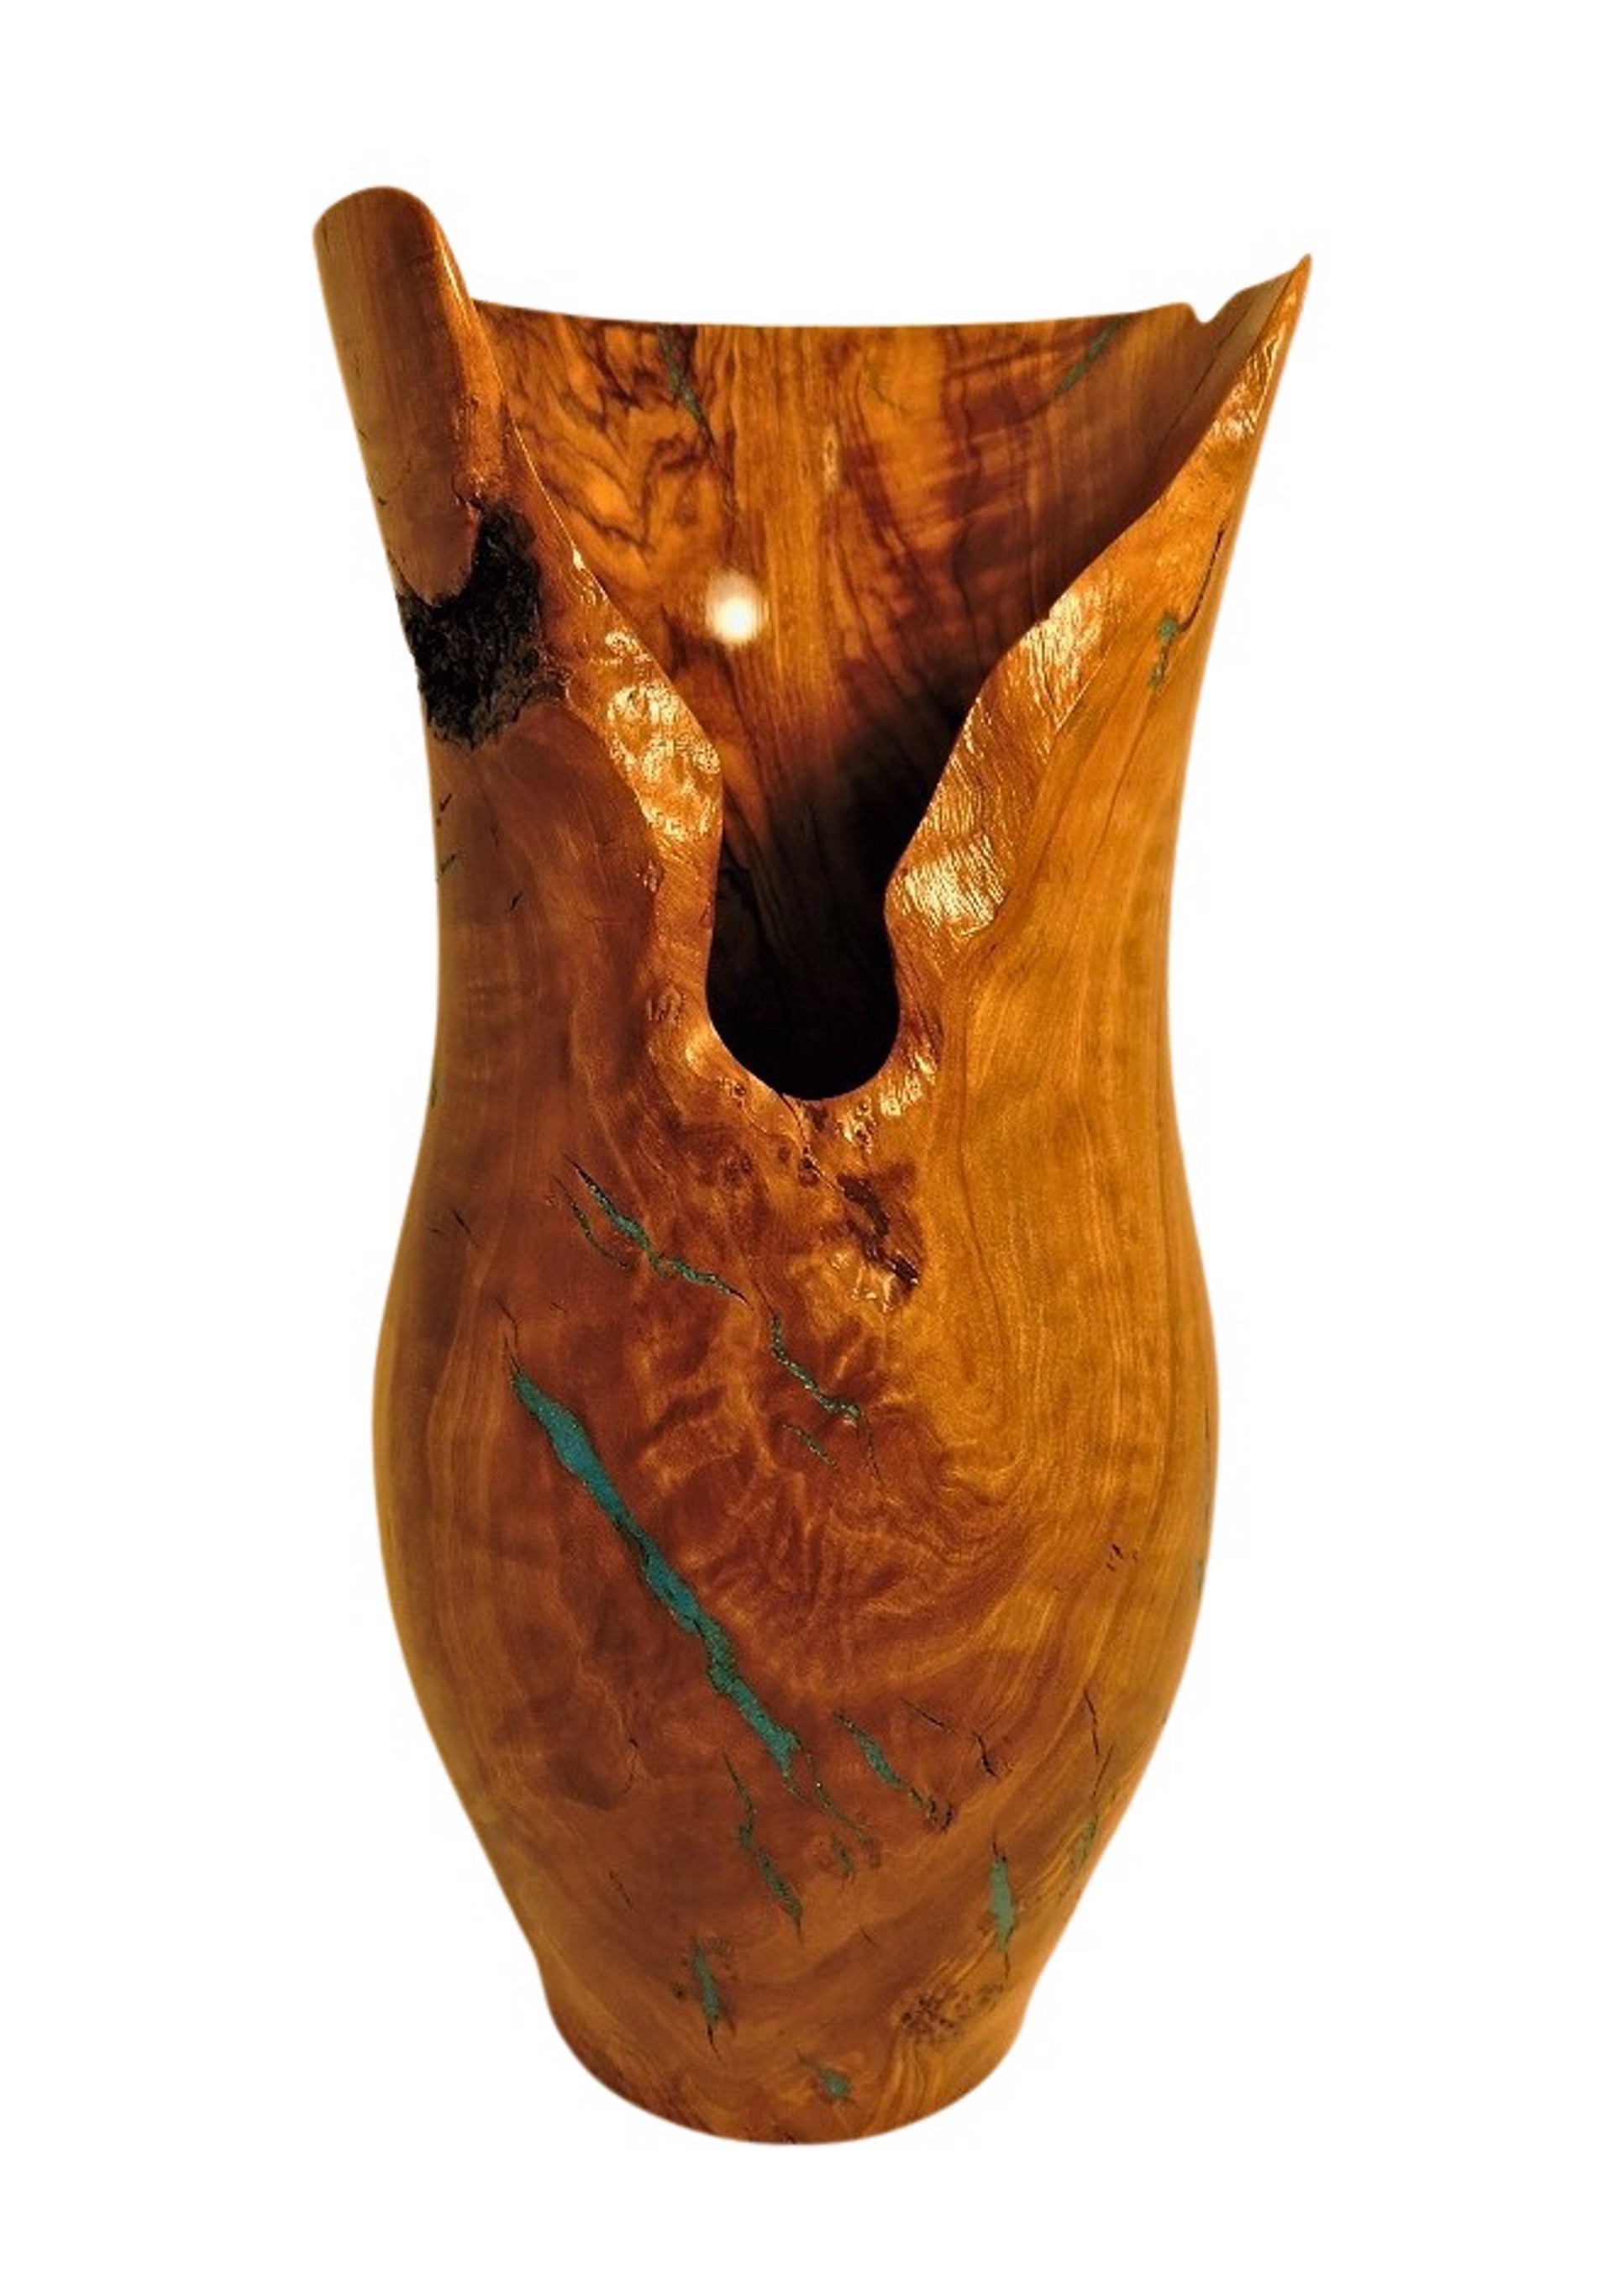 Spalted Elder with Turquoise Inlay - Carved Vase by Jim Scott